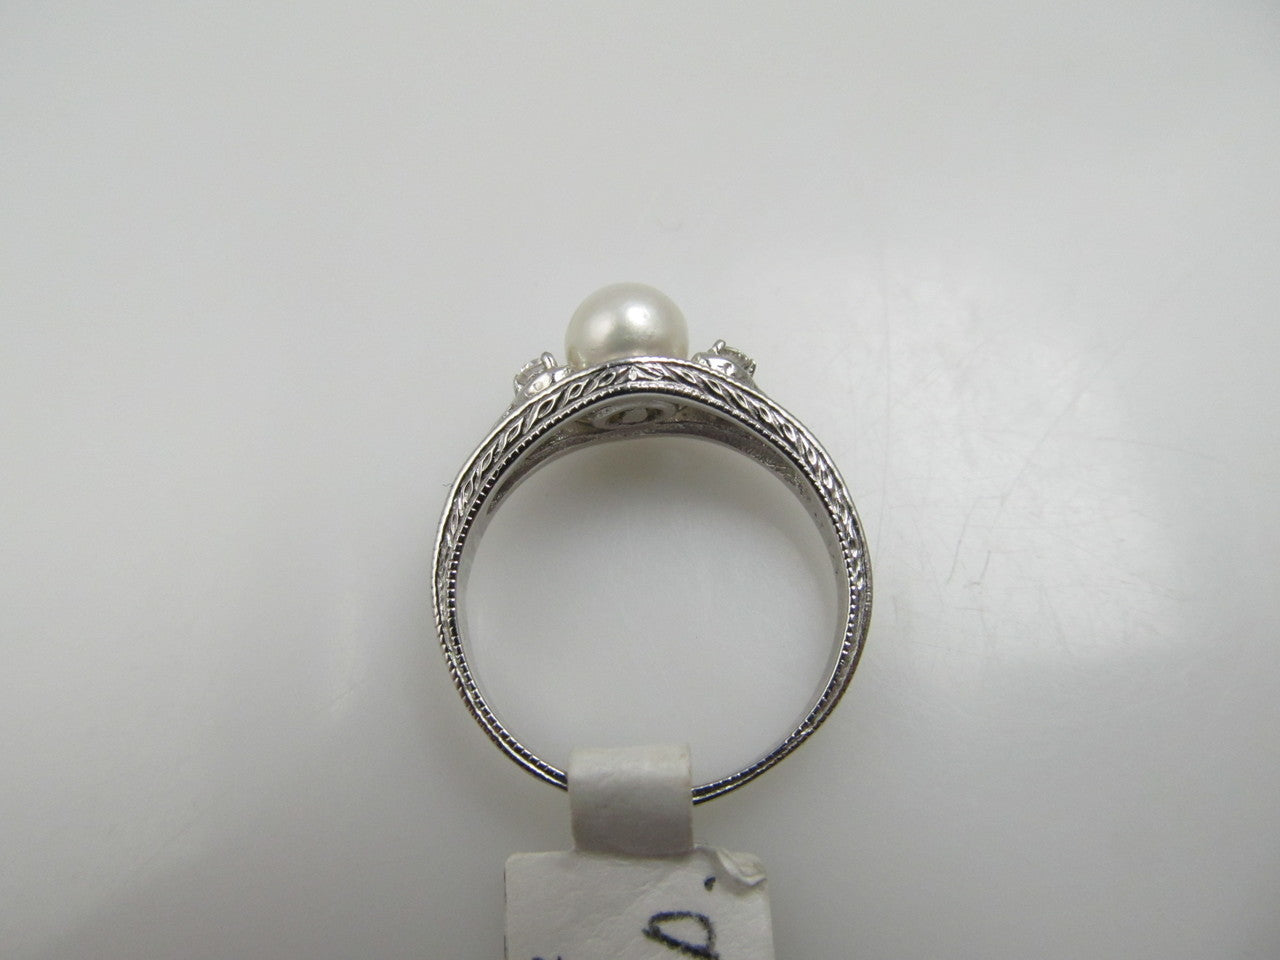 14k white gold ring with diamonds and a pearl